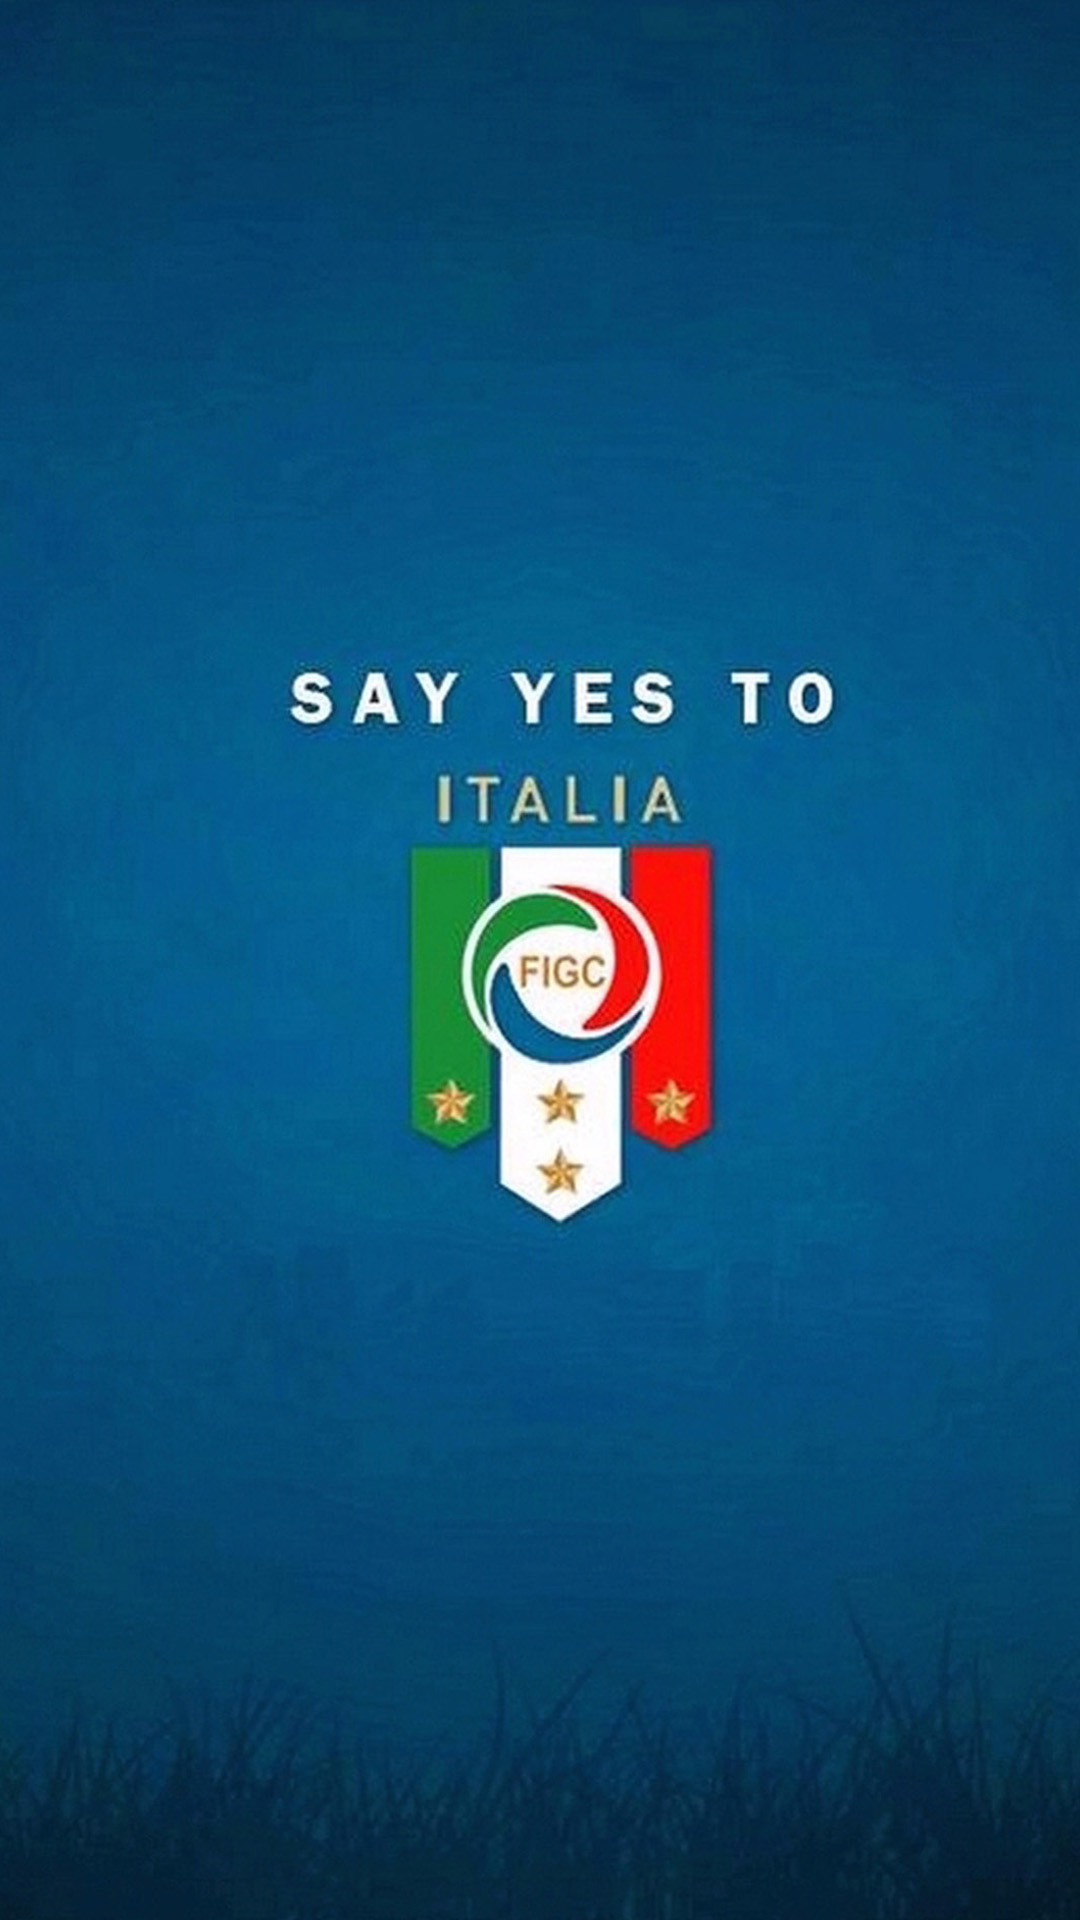 SAY YES TO ITALIA Htc One M8 - Best htc one wallpapers